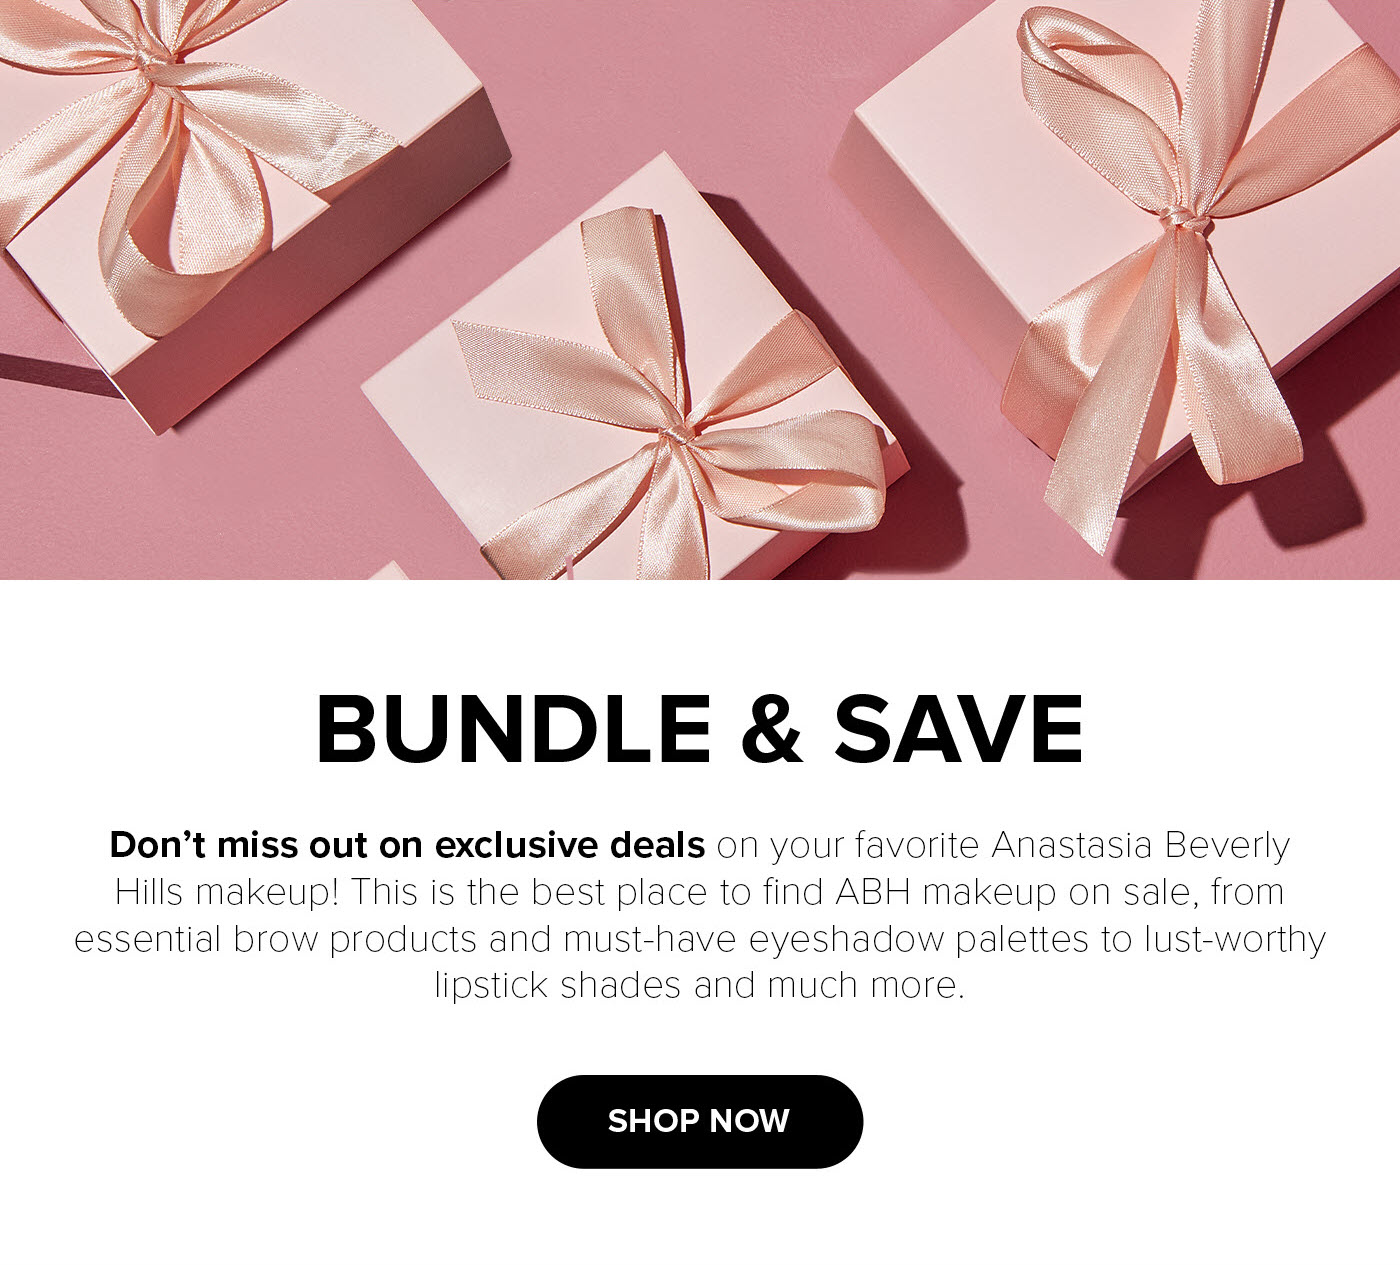 New! Bundle & Save On These Exclusive Deals!